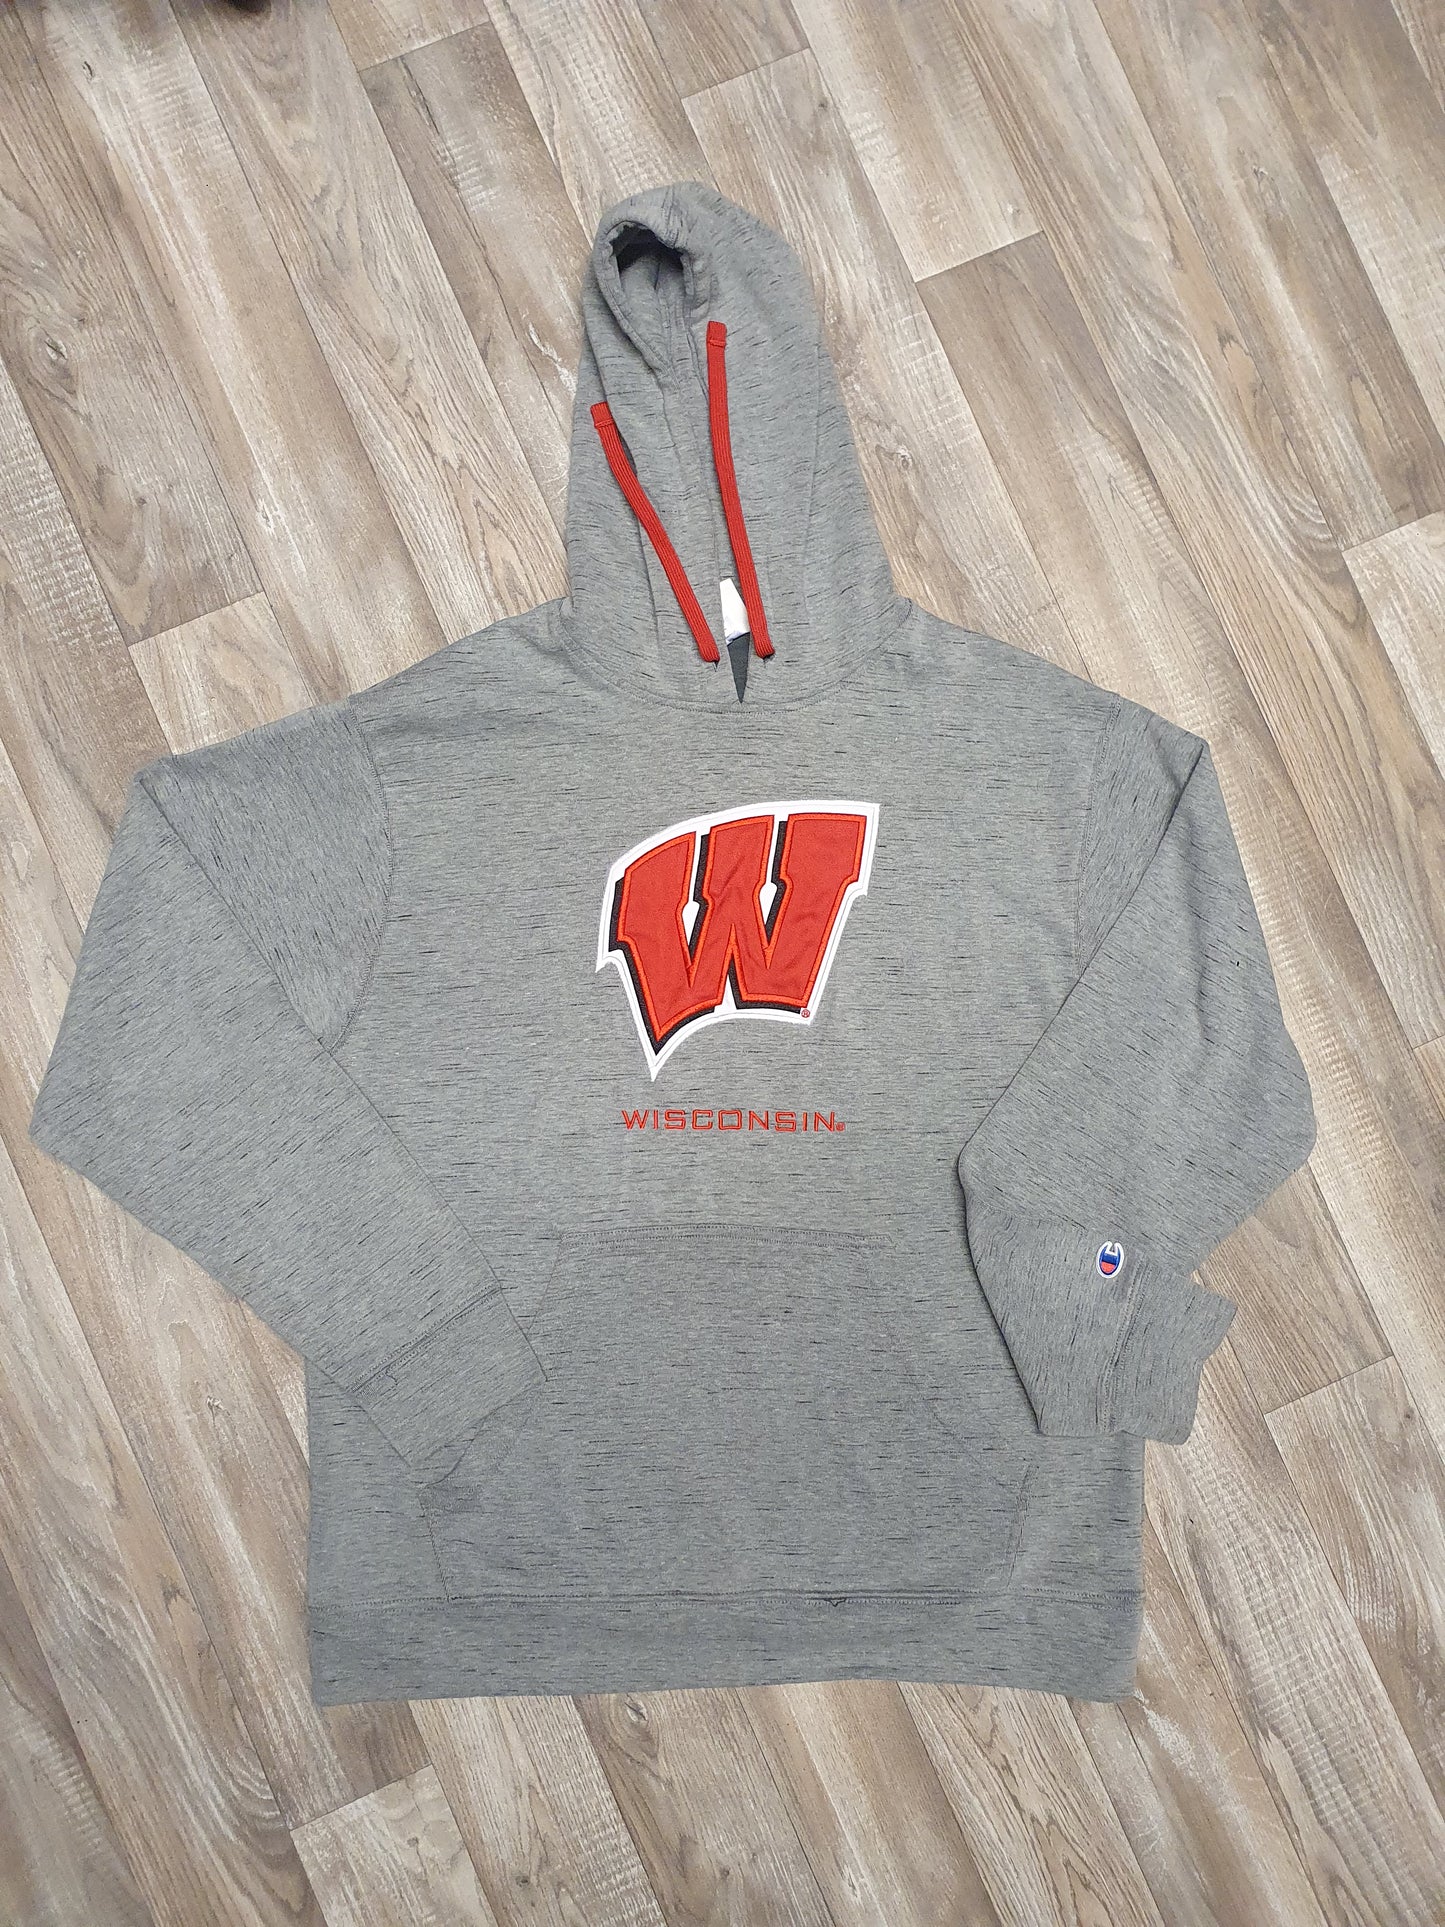 Wisconsin Badgers Sweater Hoodie Size Large